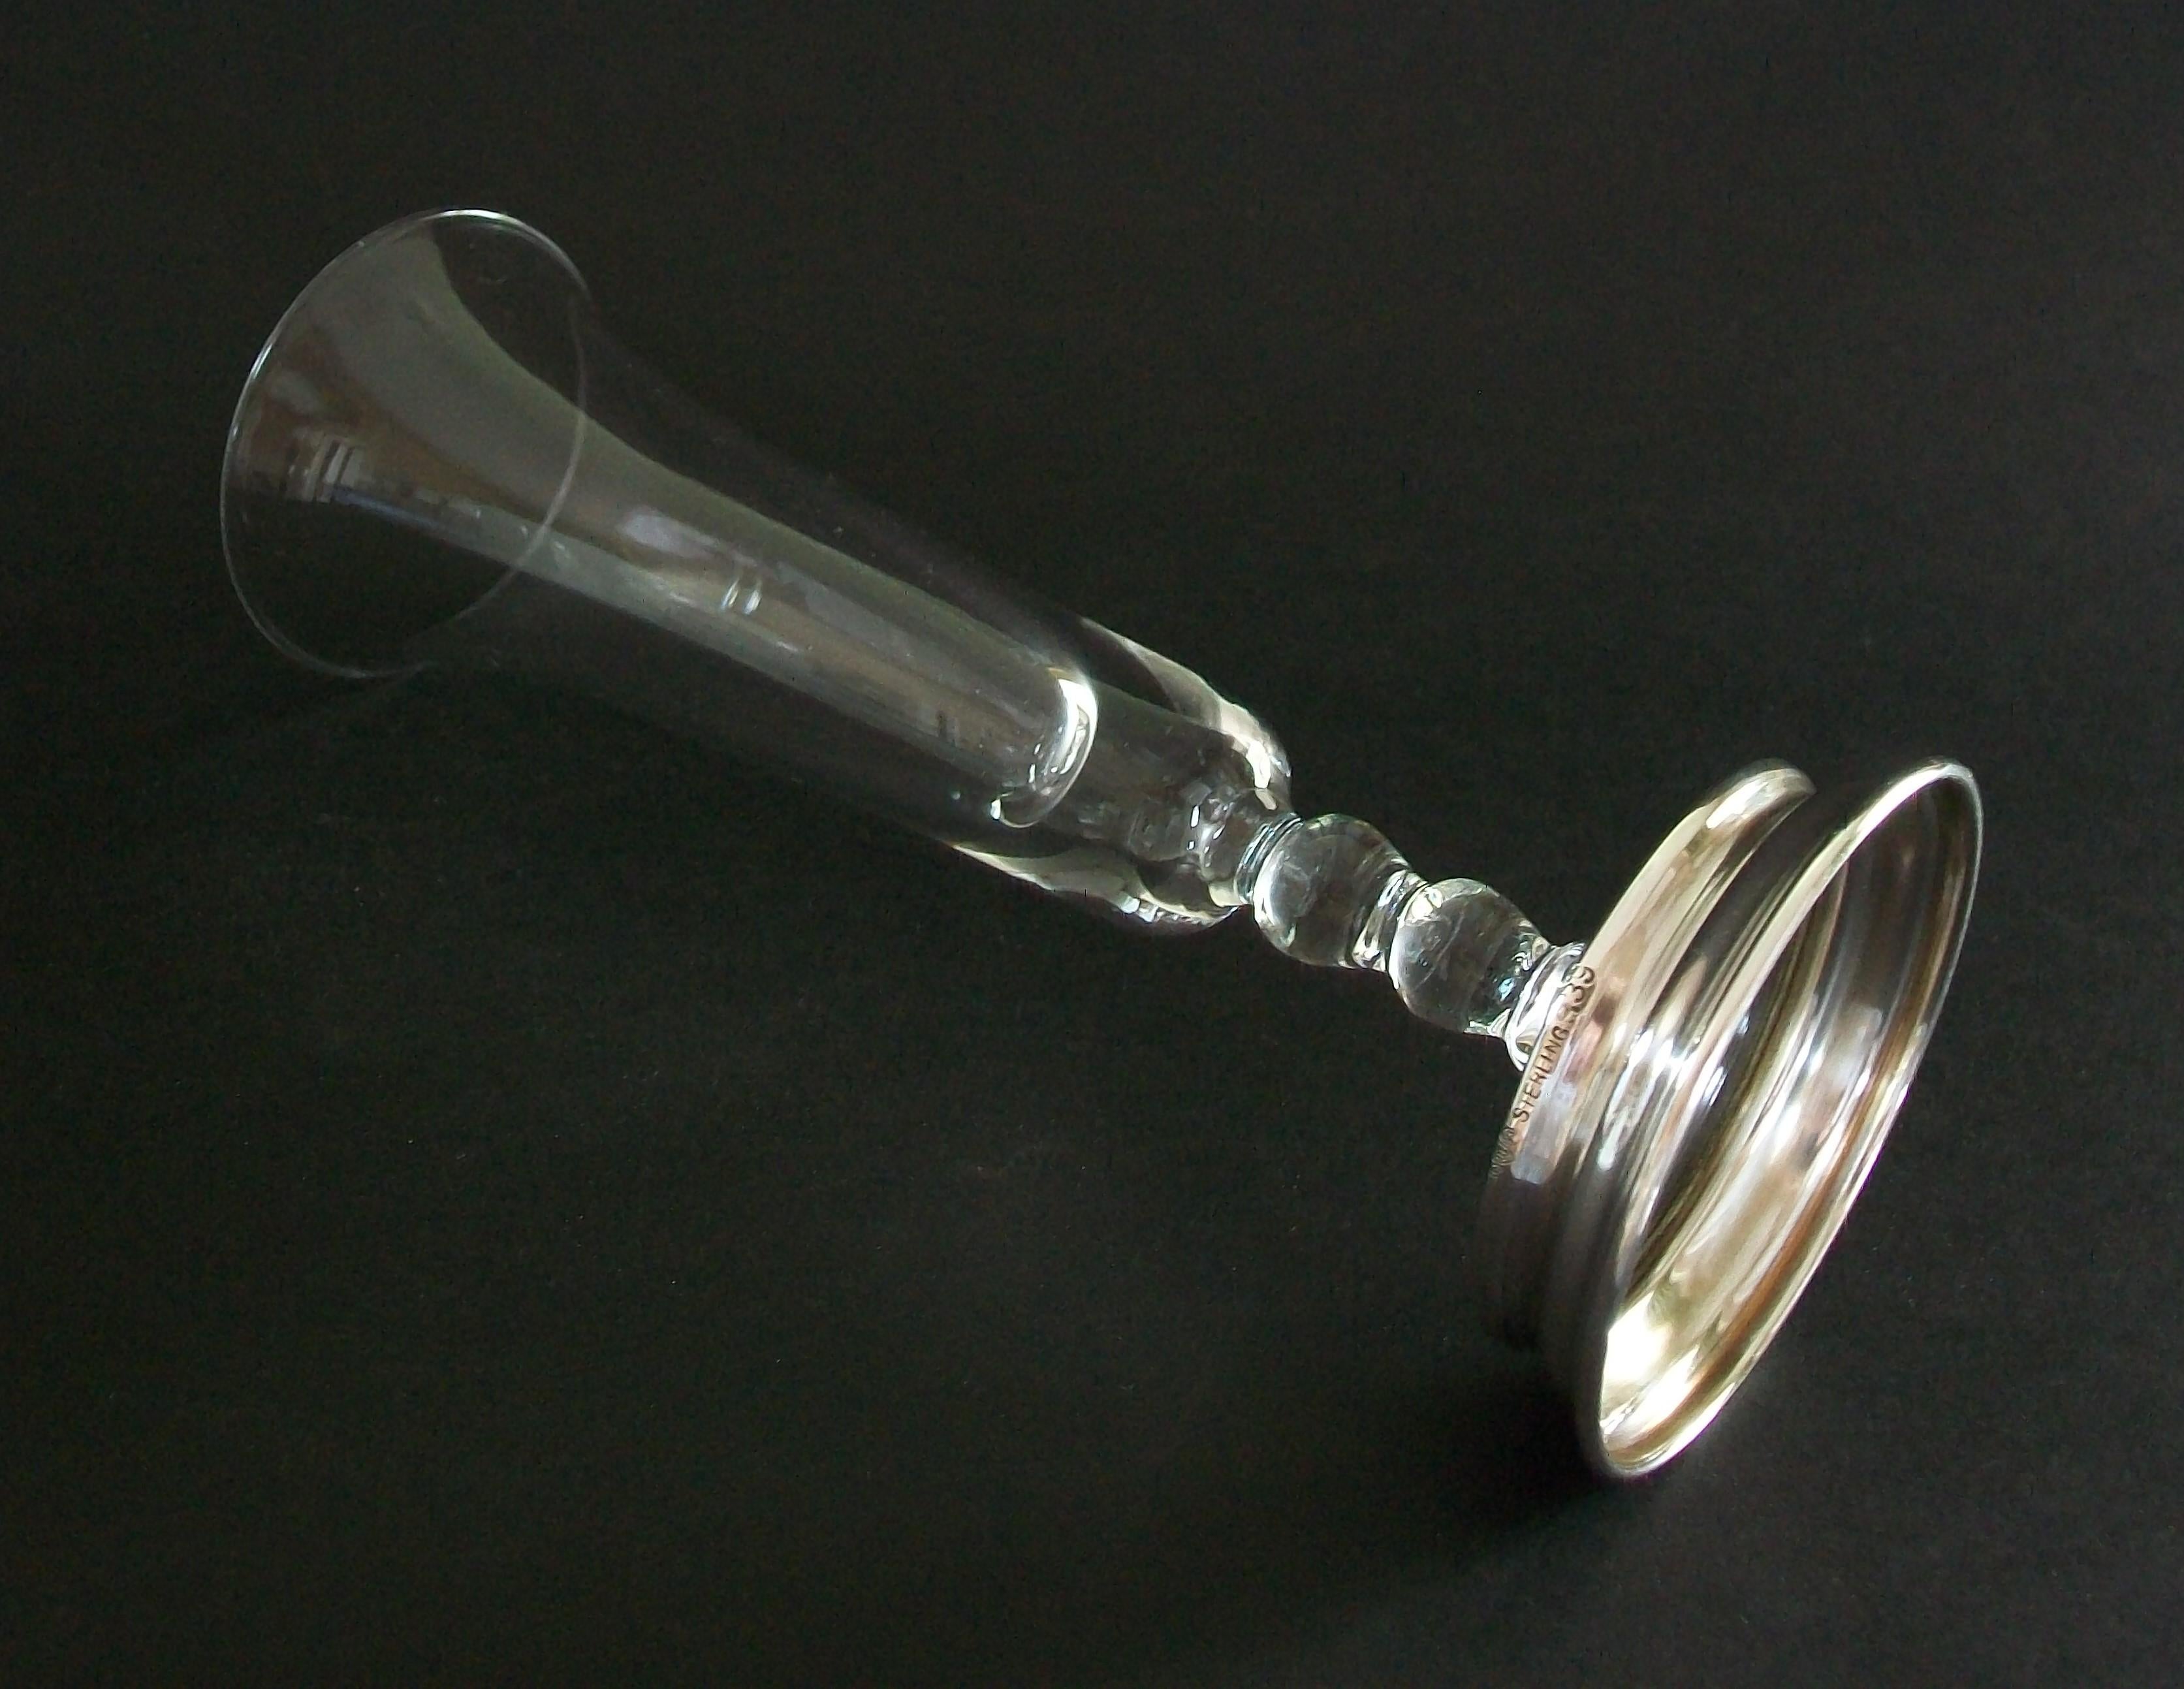 Hand-Crafted Art Deco Glass Trumpet Vase with Sterling Silver Base - U.K. - Mid 20th Century For Sale